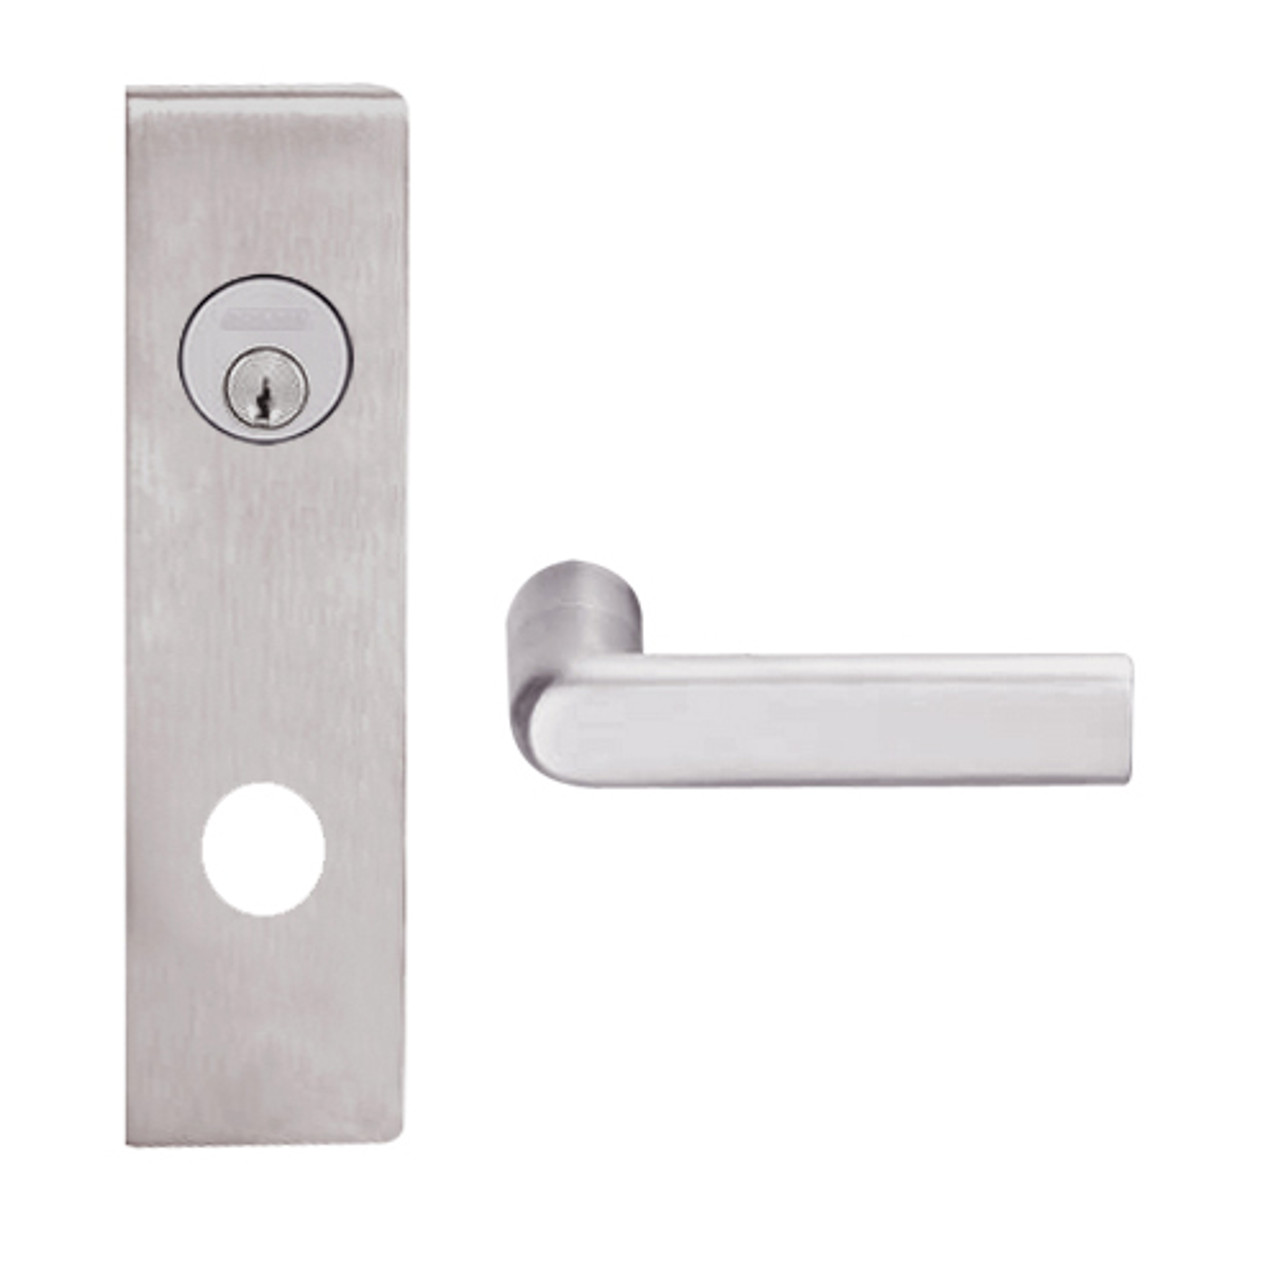 L9456L-01N-630 Schlage L Series Less Cylinder Corridor with Deadbolt Commercial Mortise Lock with 01 Cast Lever Design in Satin Stainless Steel